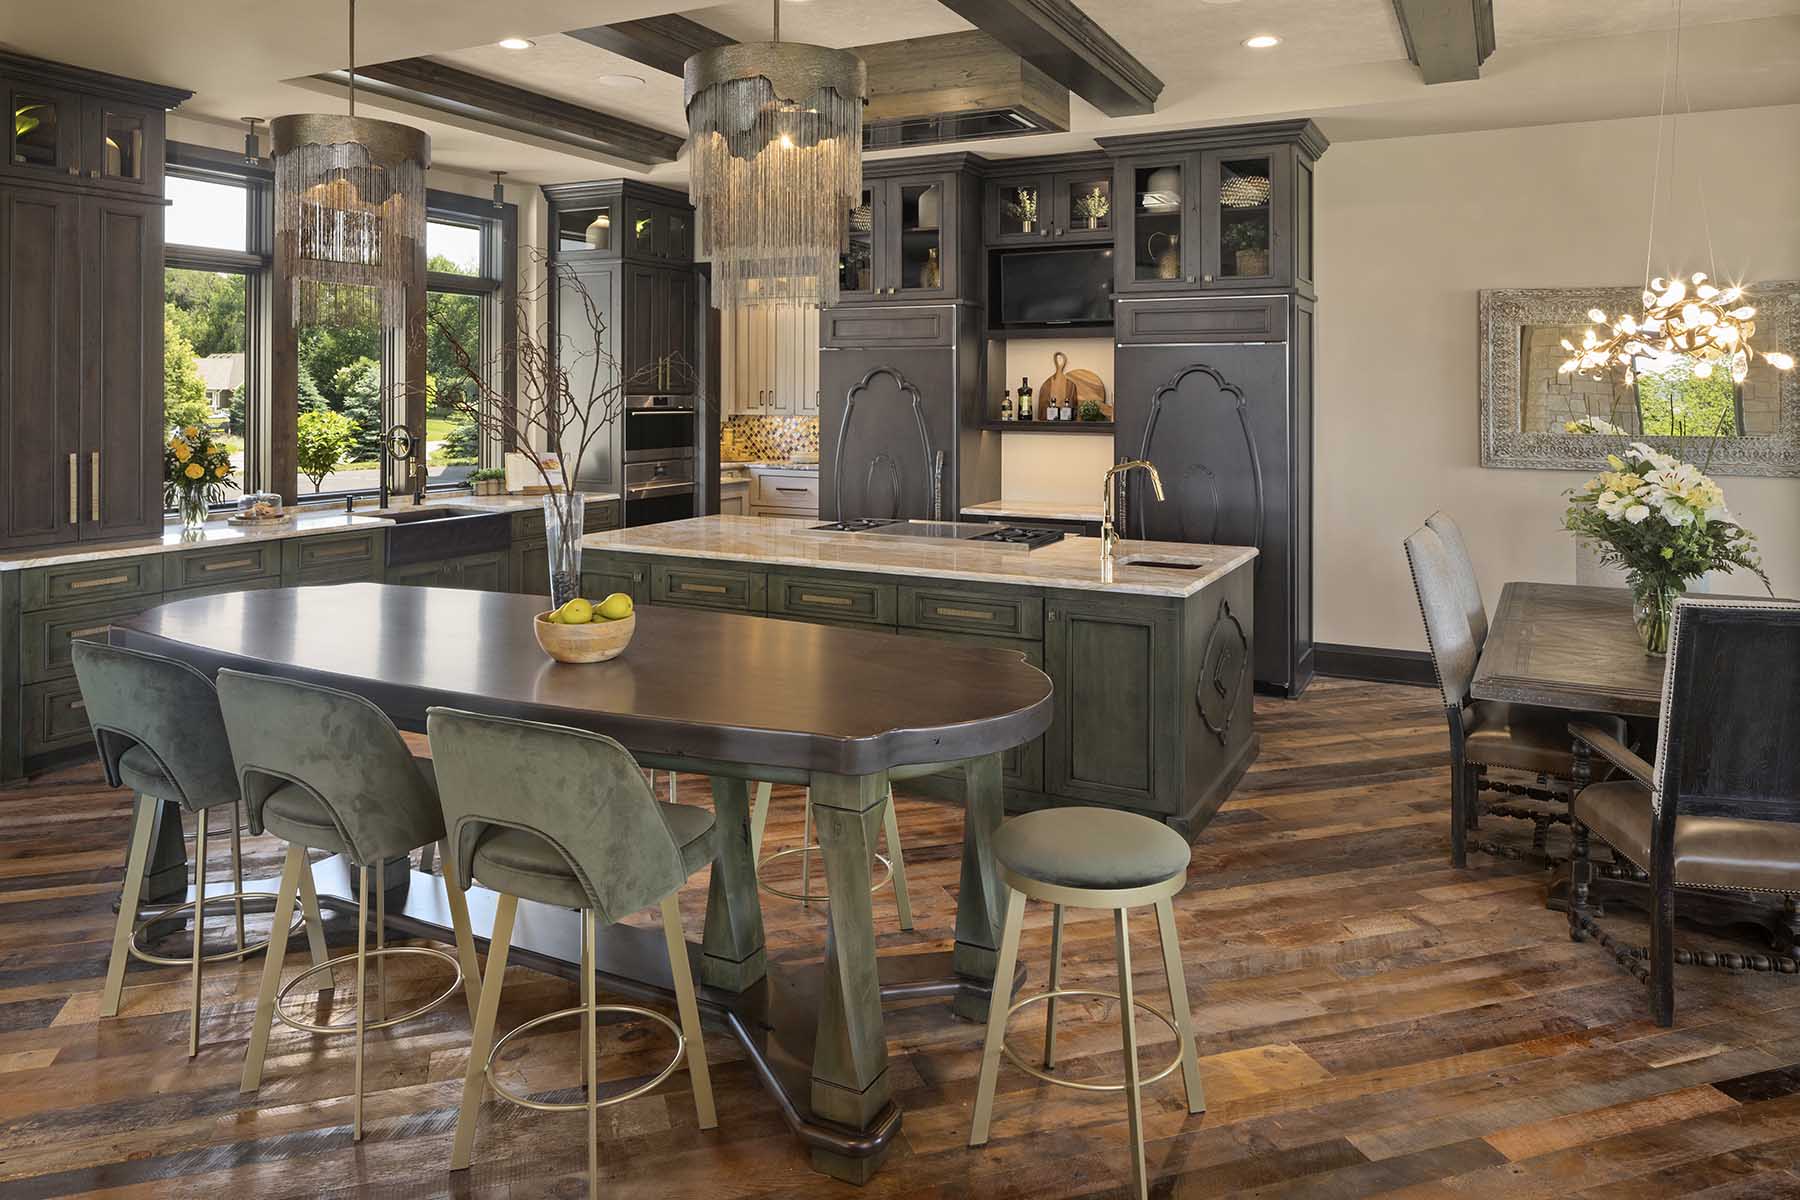 A modern kitchen with wood floors and a center island, located in a Tuscan Mediterranean home.